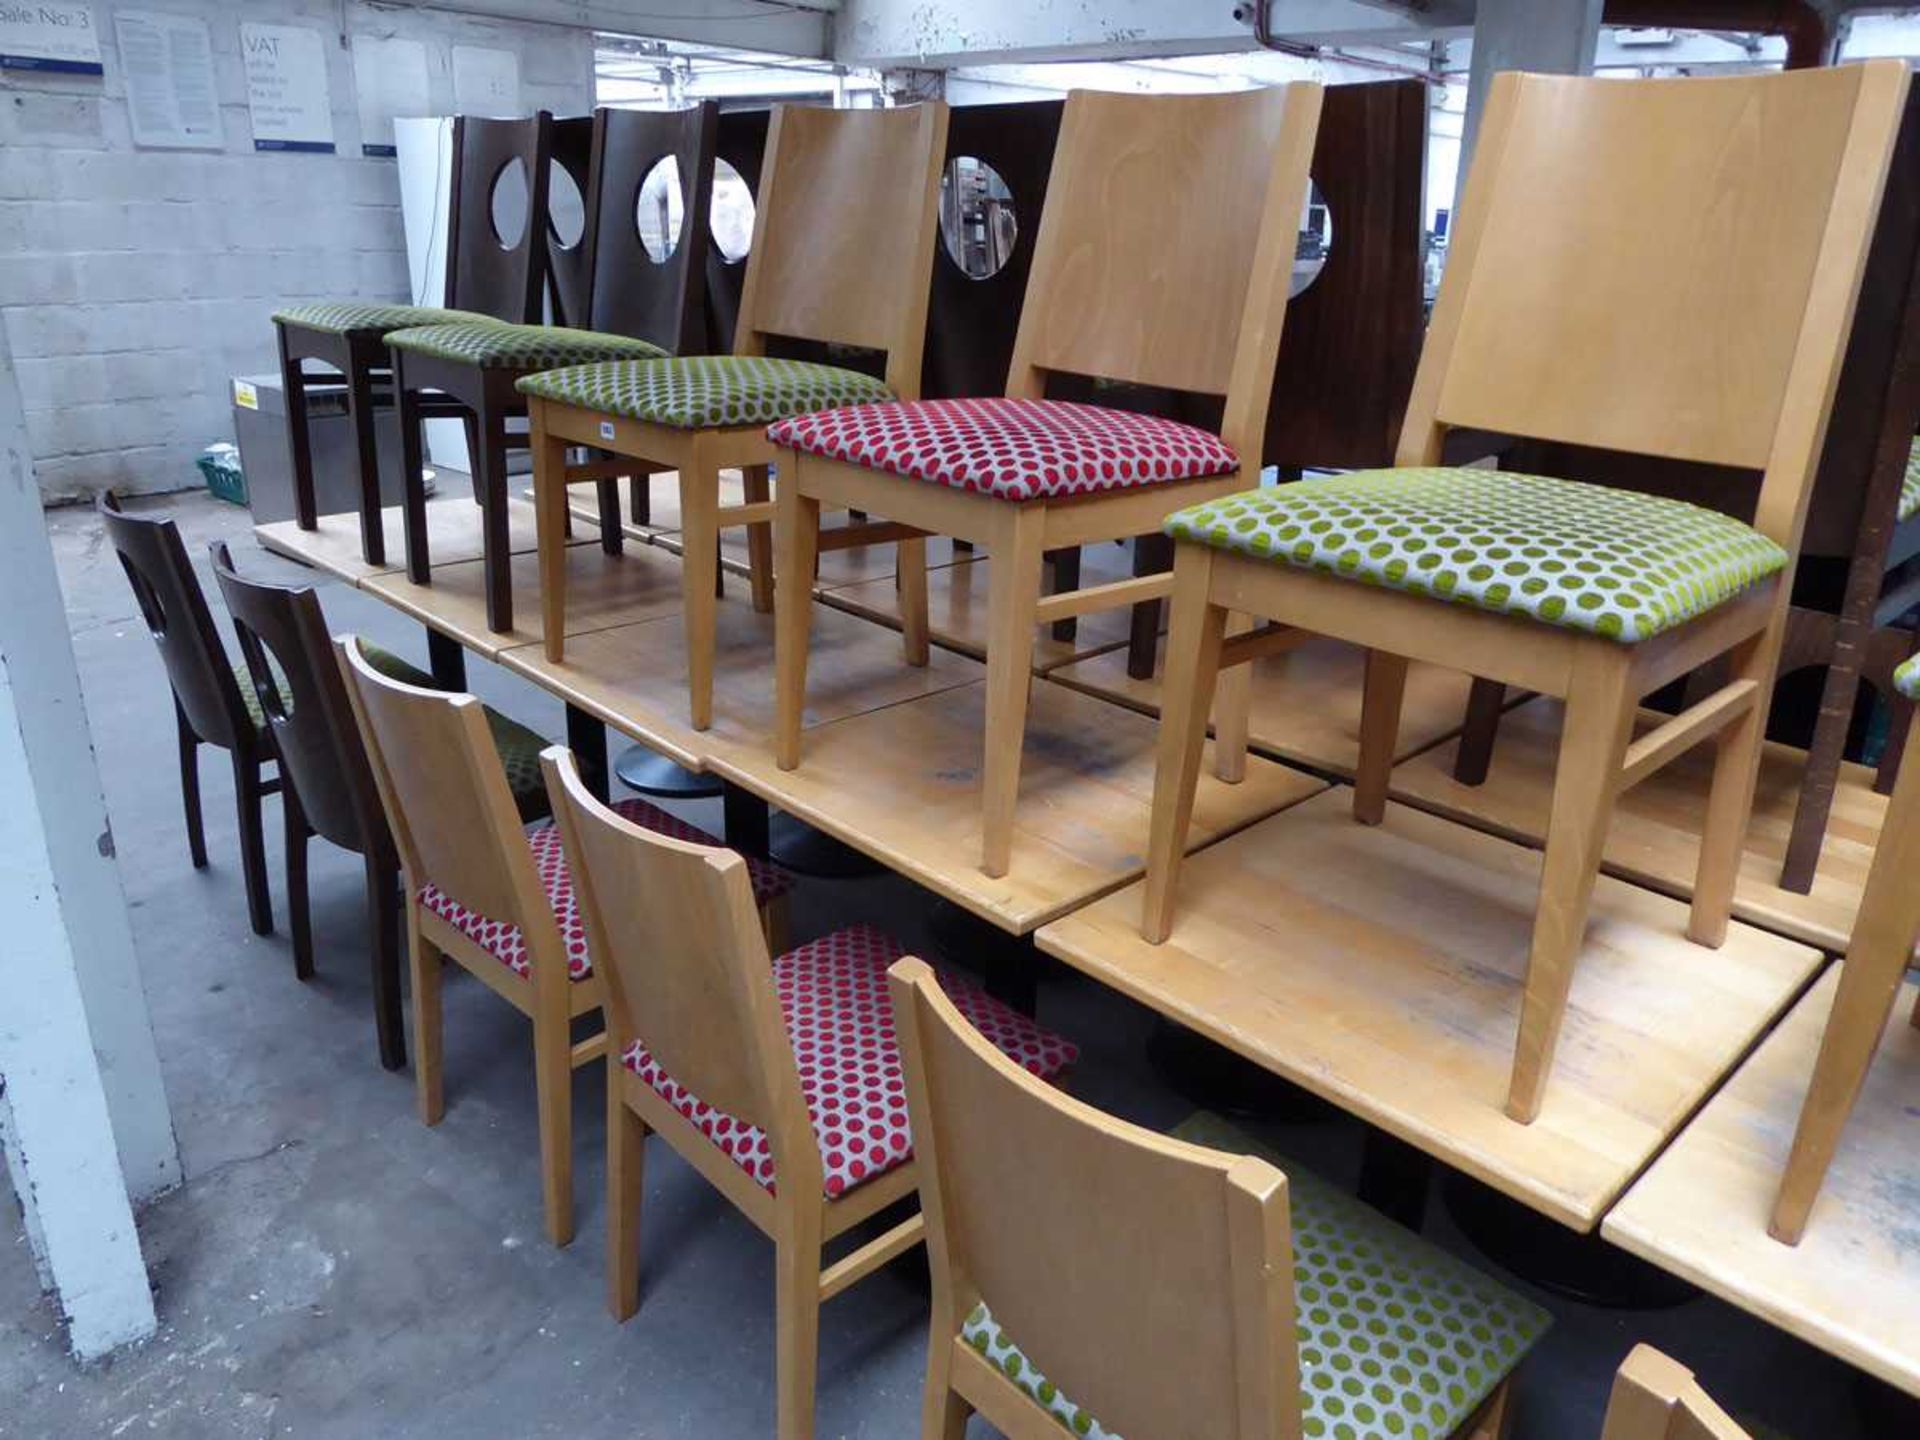 Set of 5 solid top café tables with single pedestal bases plus 10 assorted polka dot dining chairs